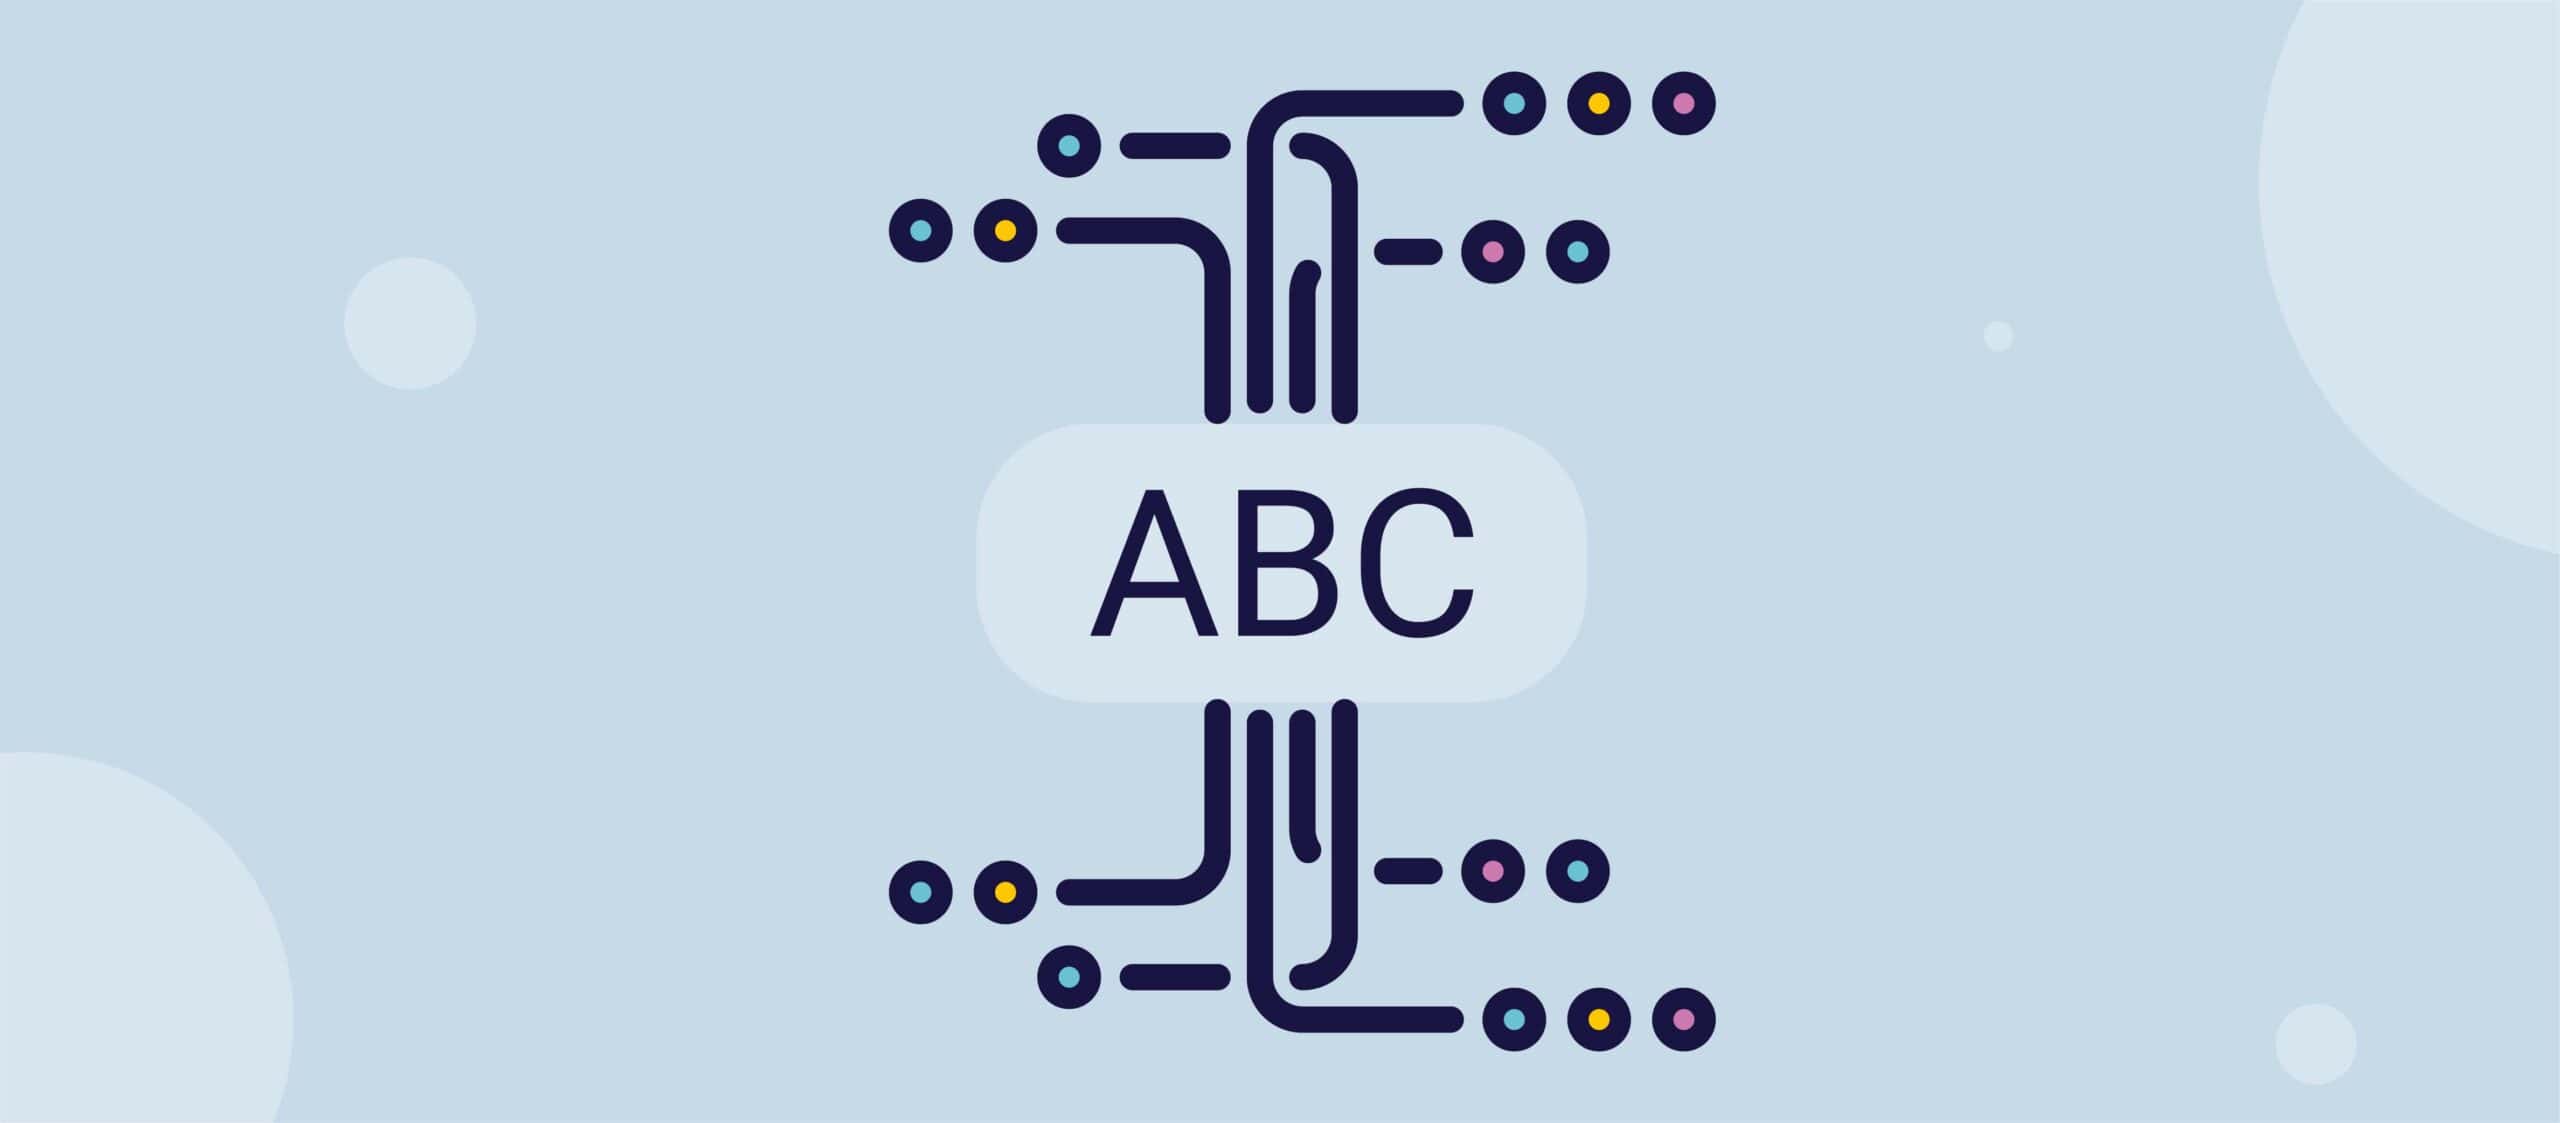 The letters A, B and C are in a bubble in the middle of the illustration. Lines leave the bubble from the top and bottom.